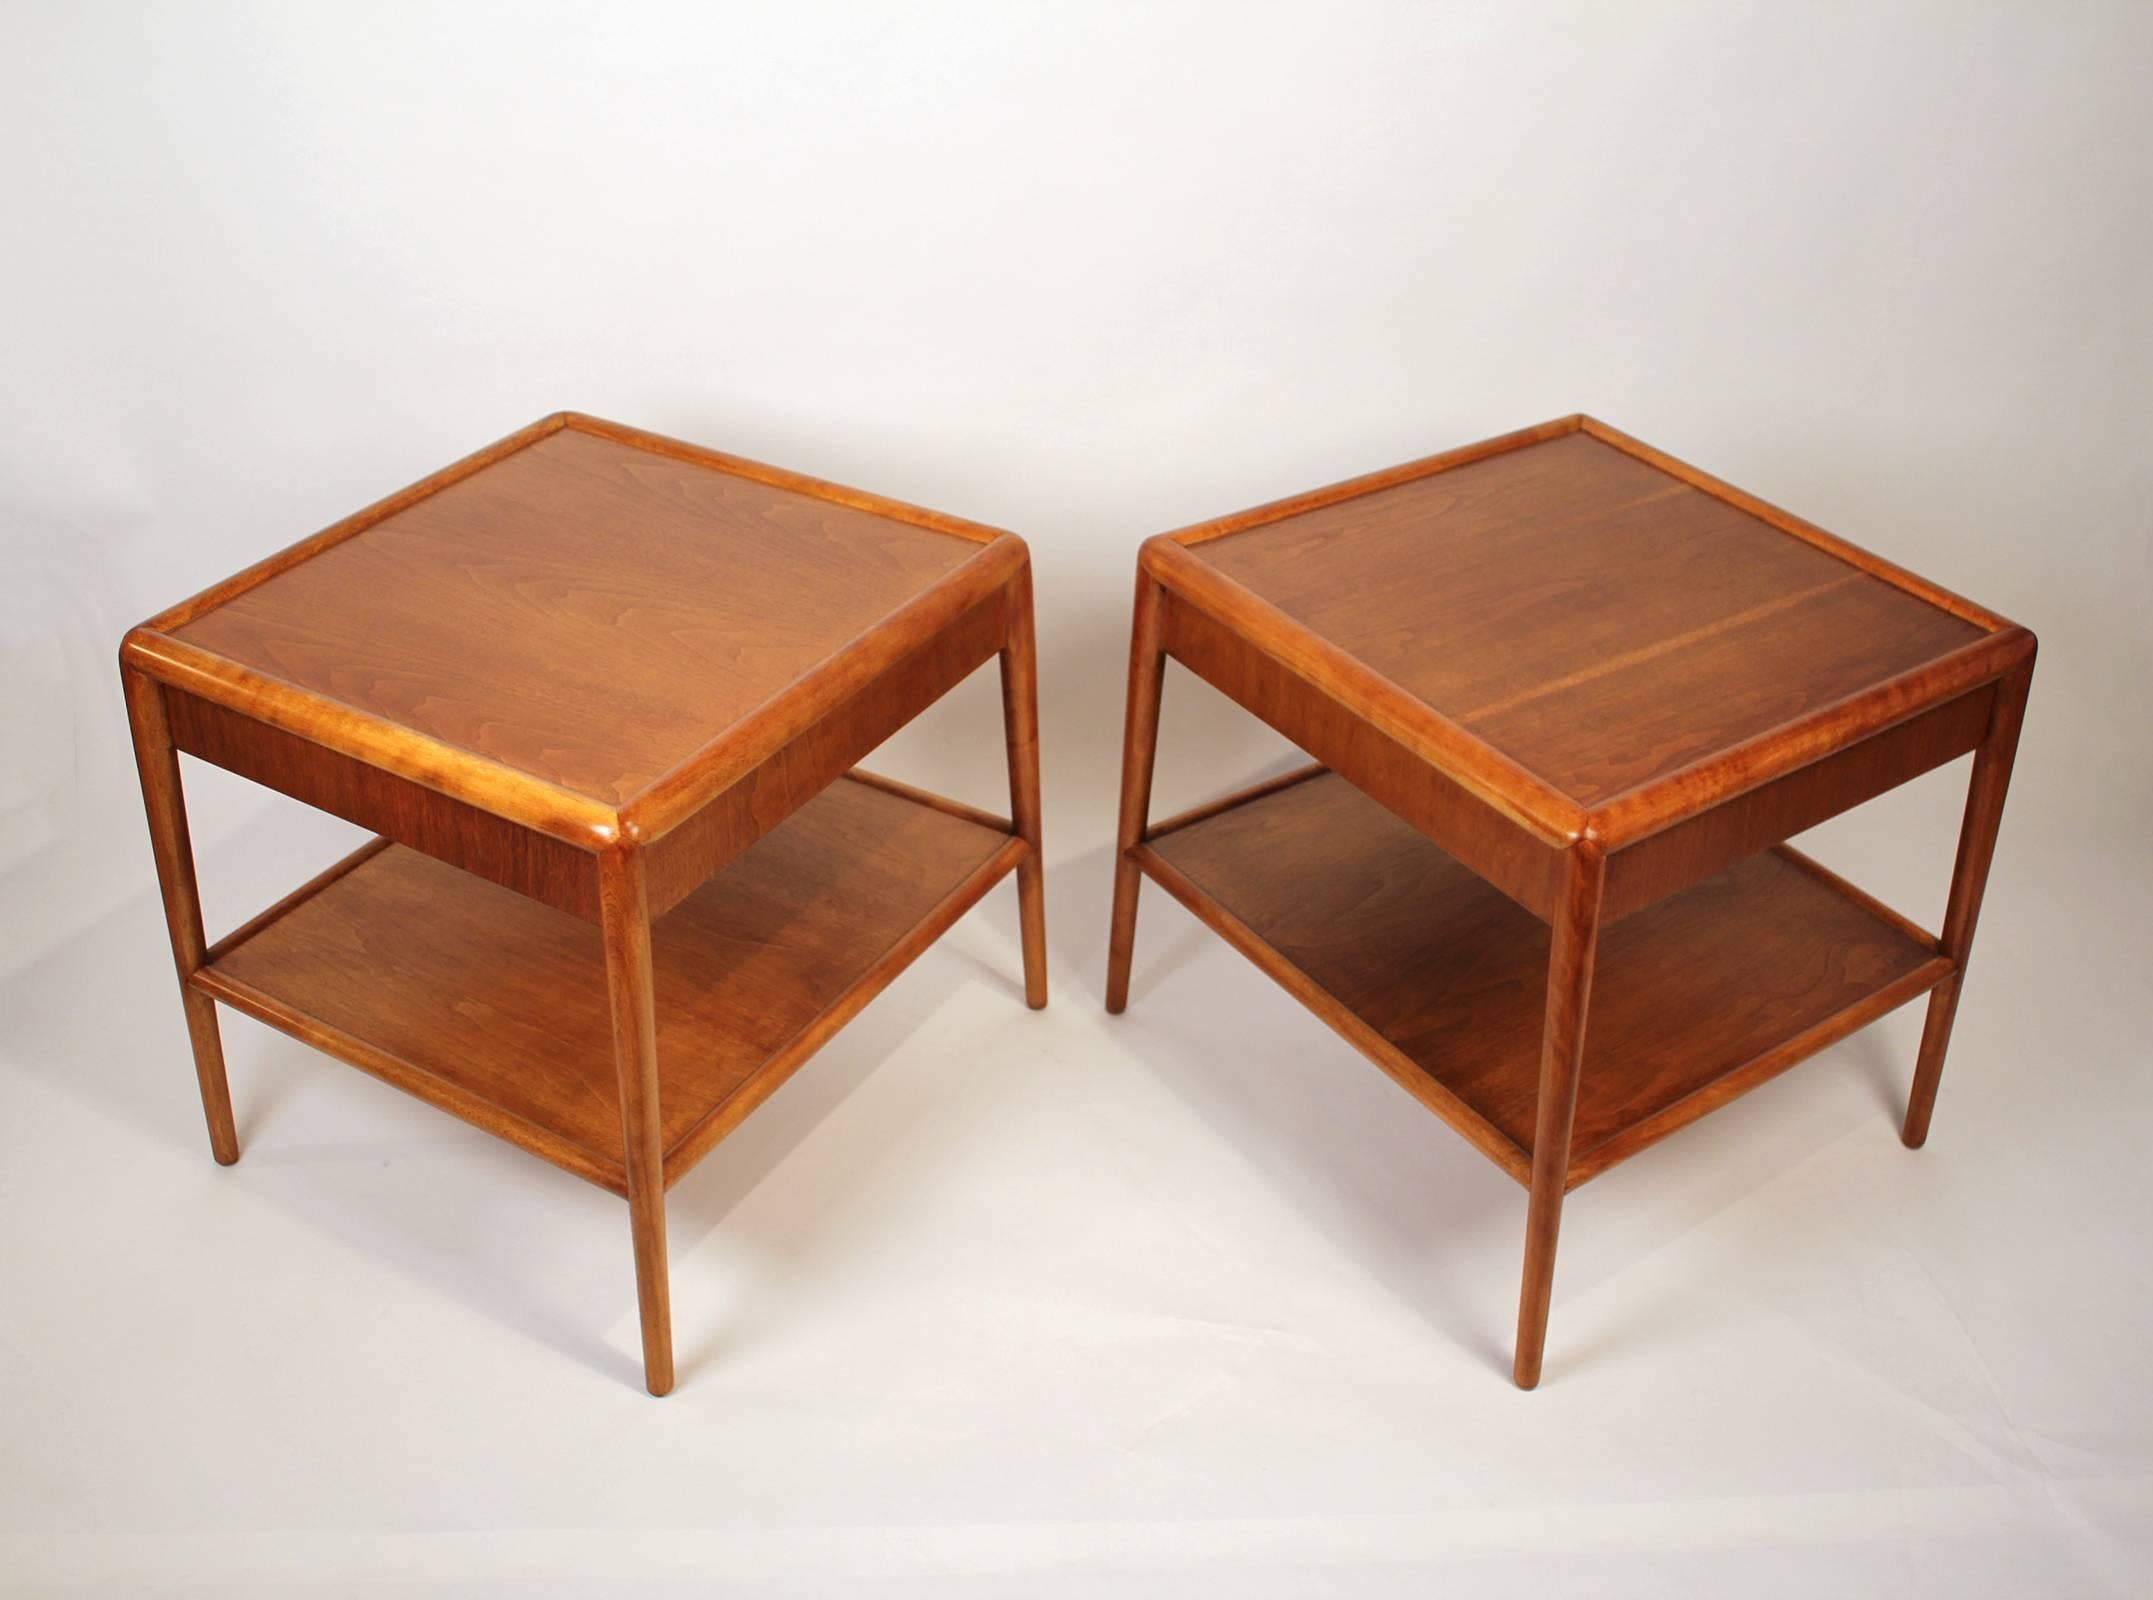 Elegantly designed pair of Gibbings night stands or end tables for Widdicomb from the 1950s. The mahogany has been professionally refinished and is in very good condition. Signed with fabric labels.